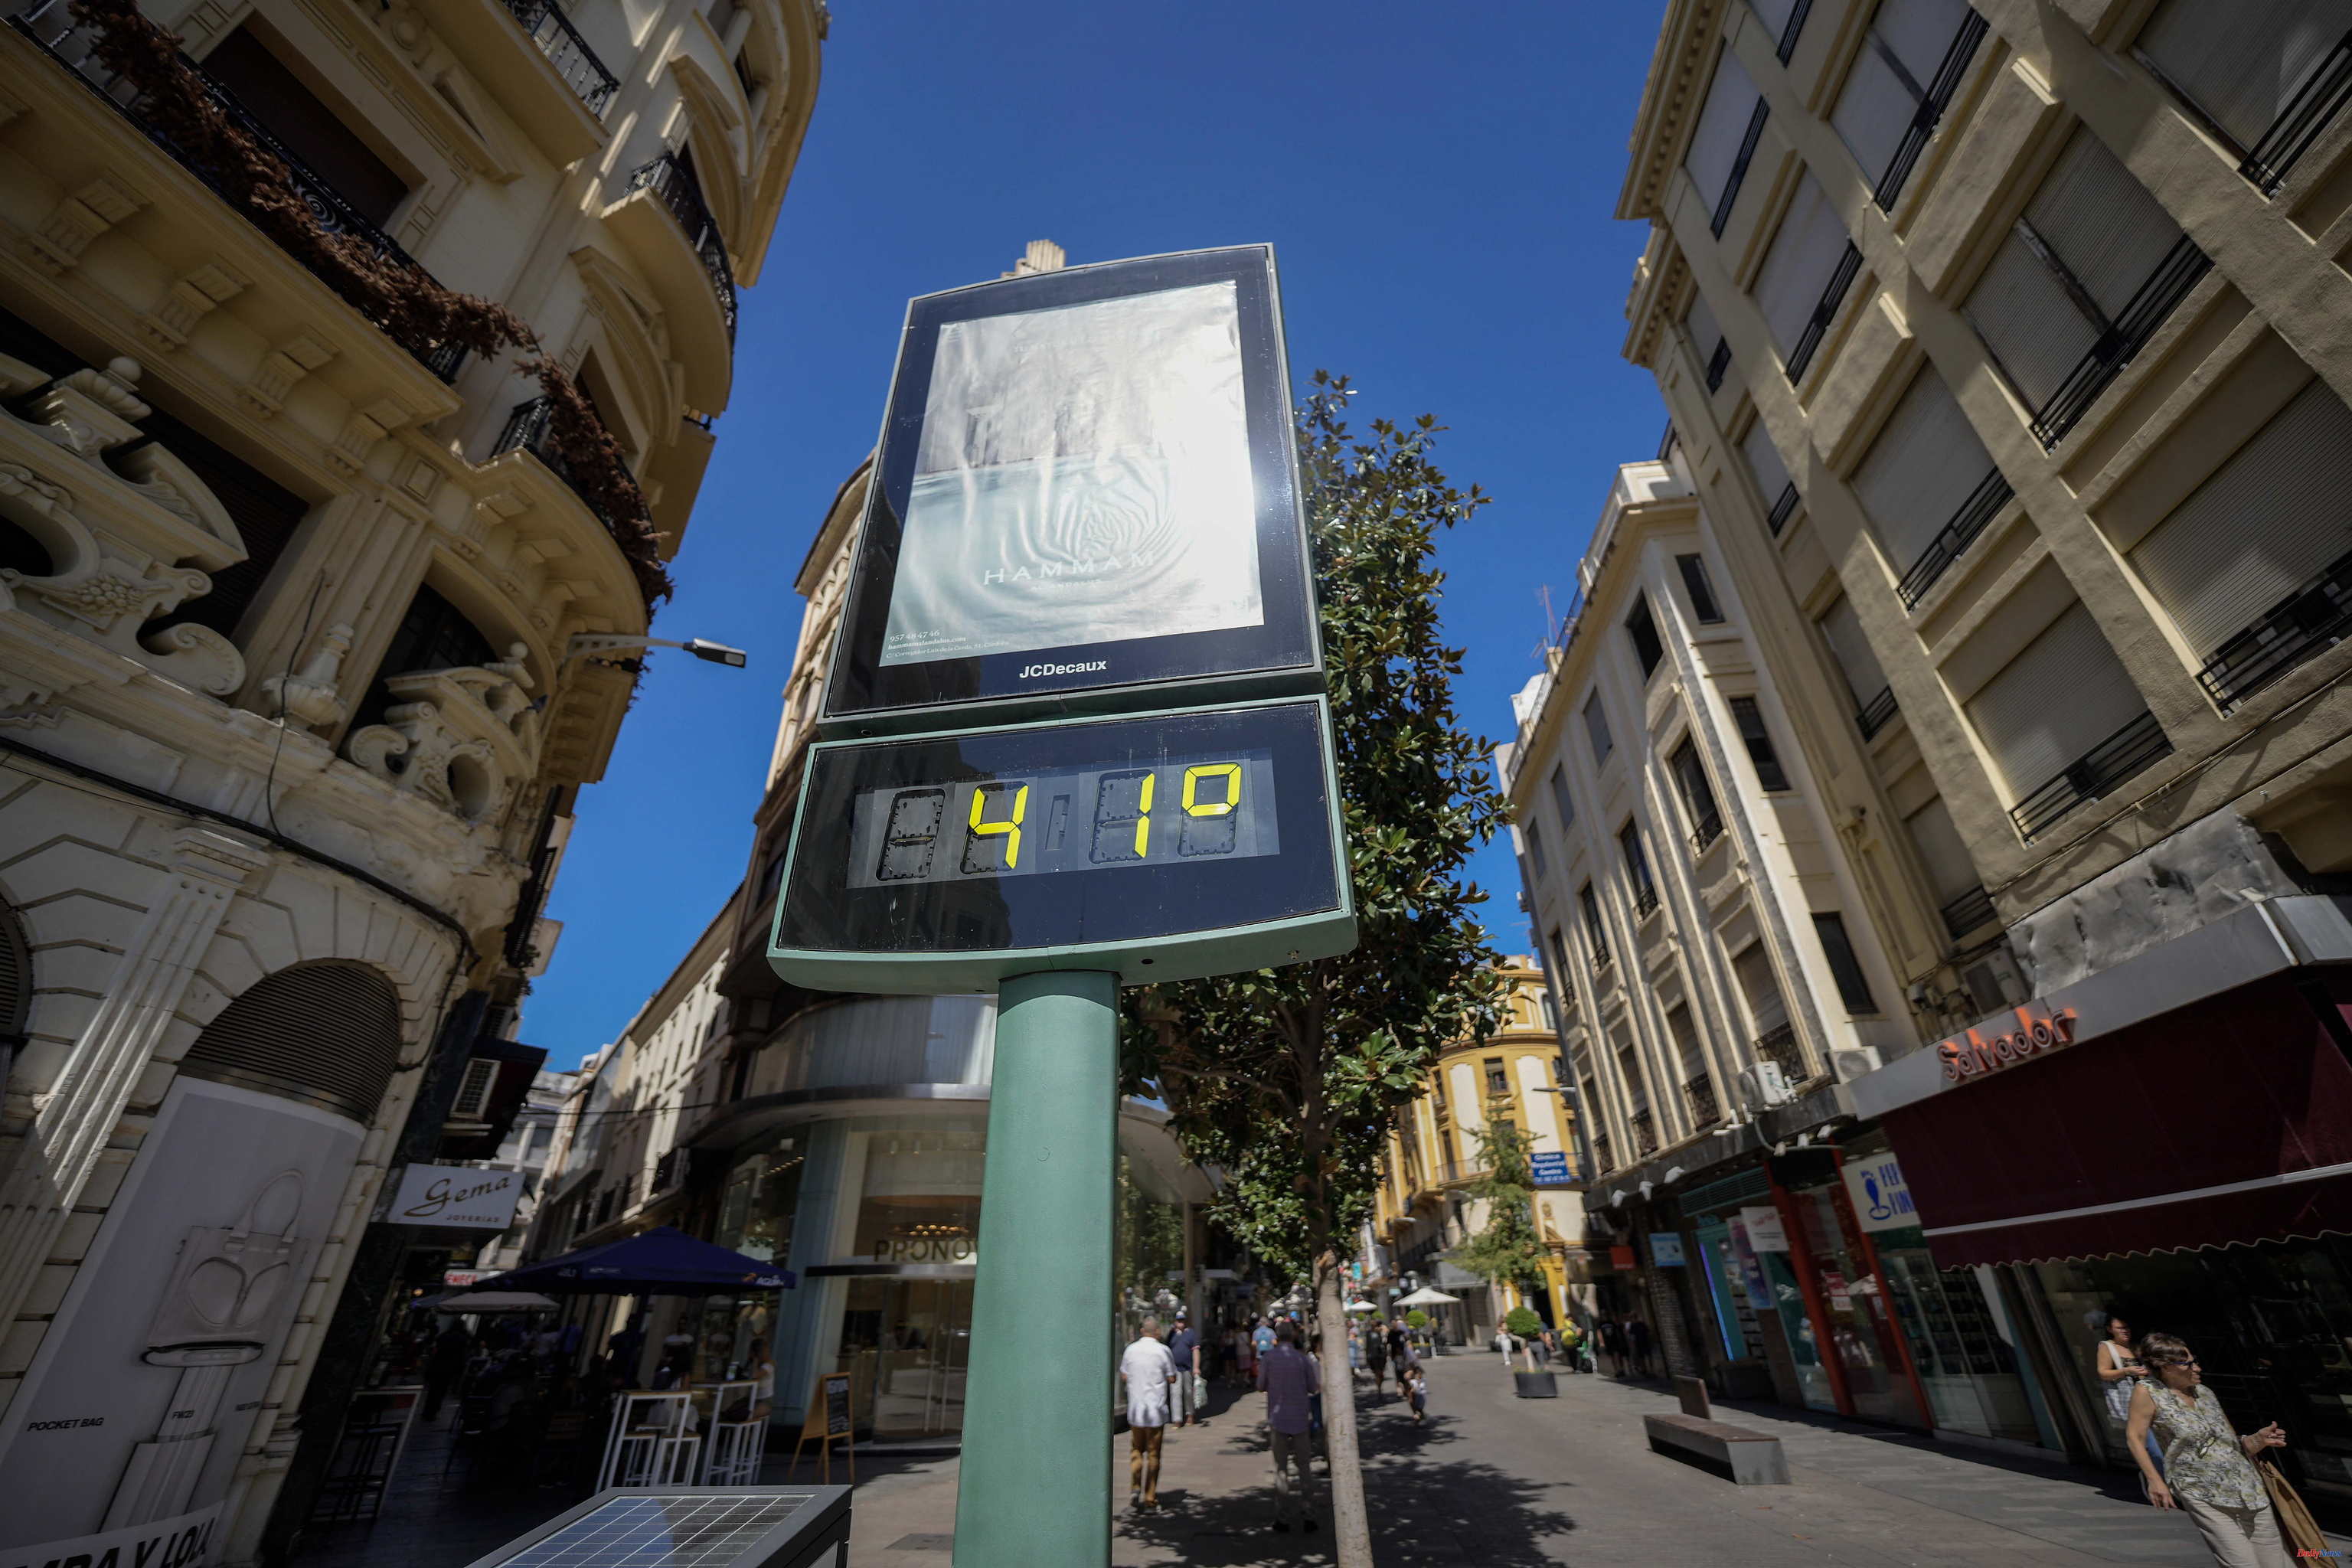 Veranillo de San Miguel Meteorology: Temperatures will exceed 30ºC this Saturday in almost all of Spain